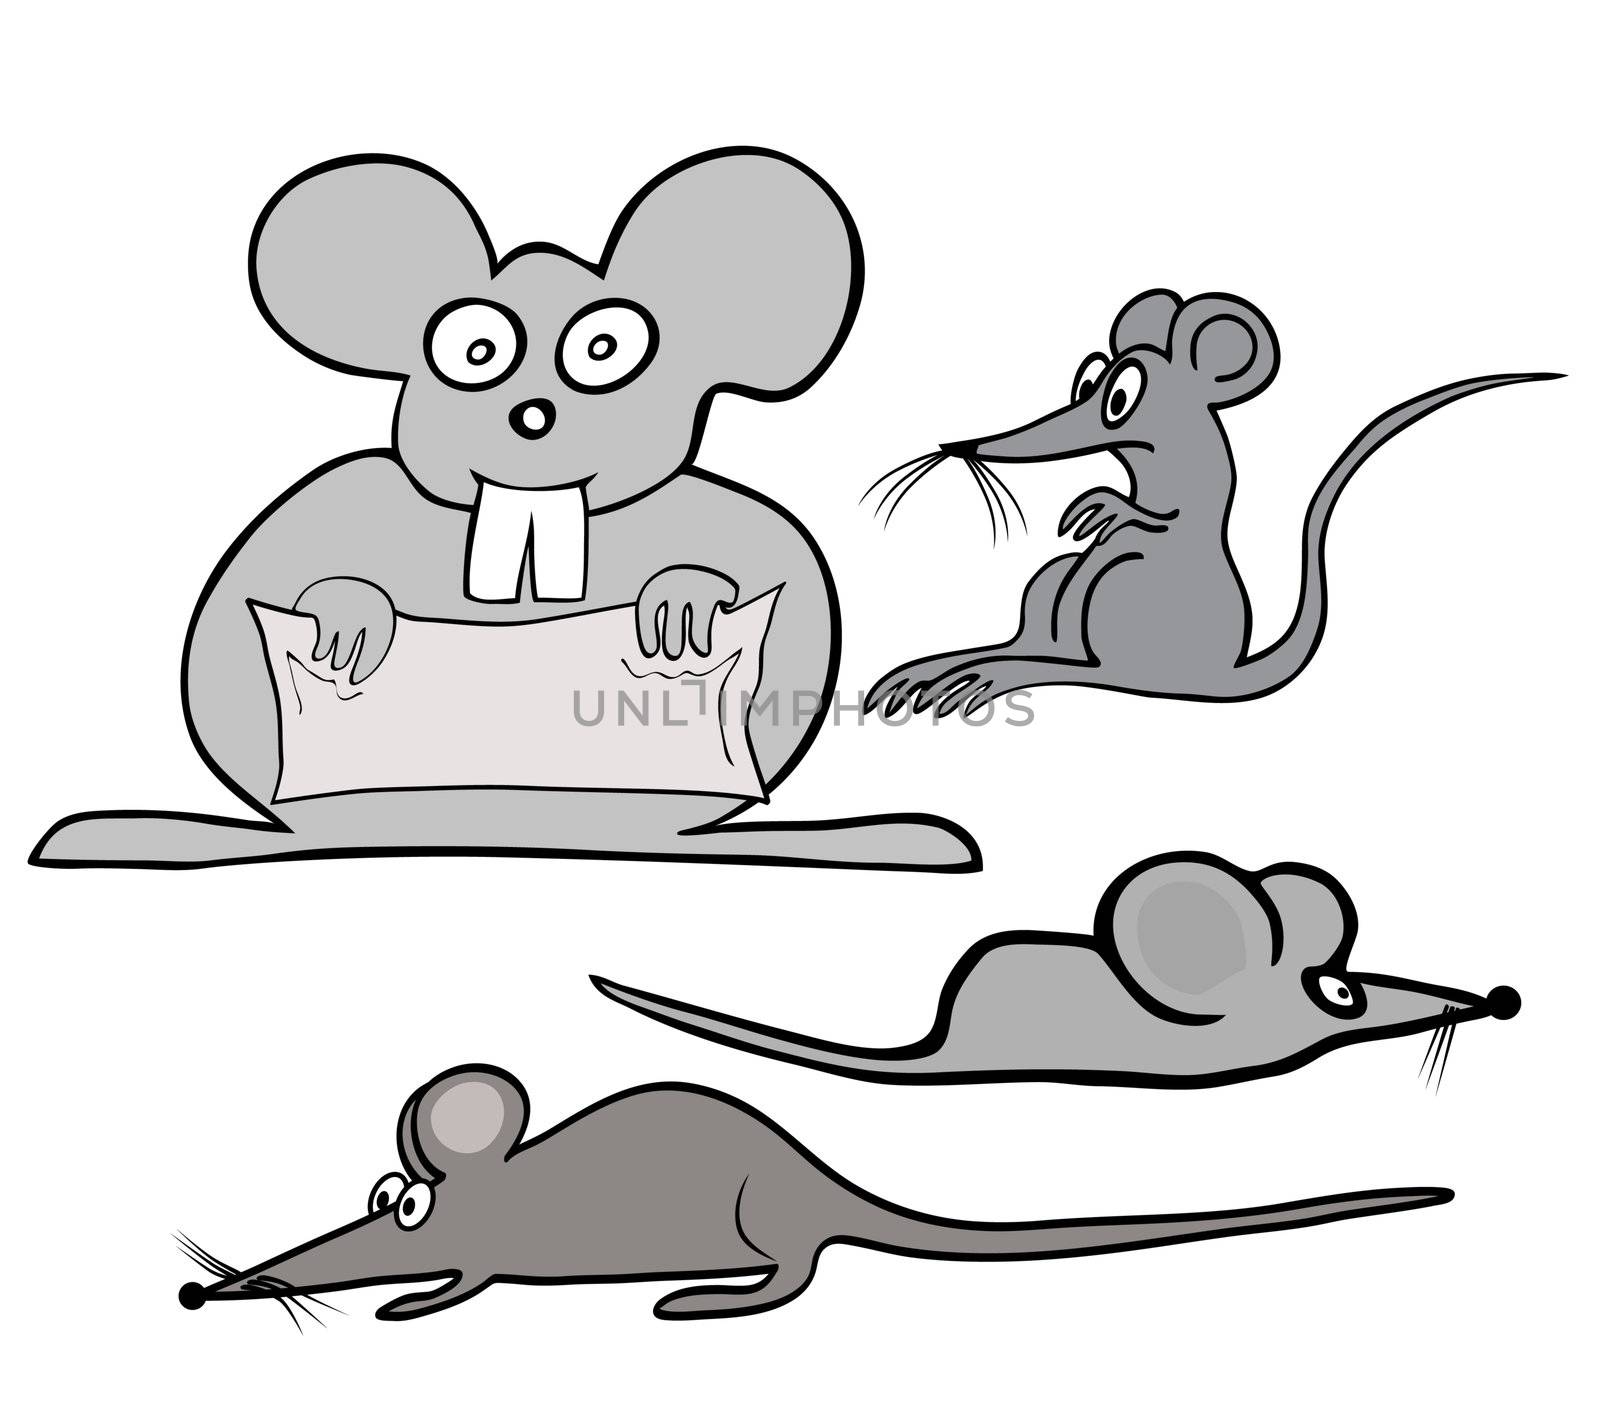 hand drawn - illustration of the various house mouses - baby mouses